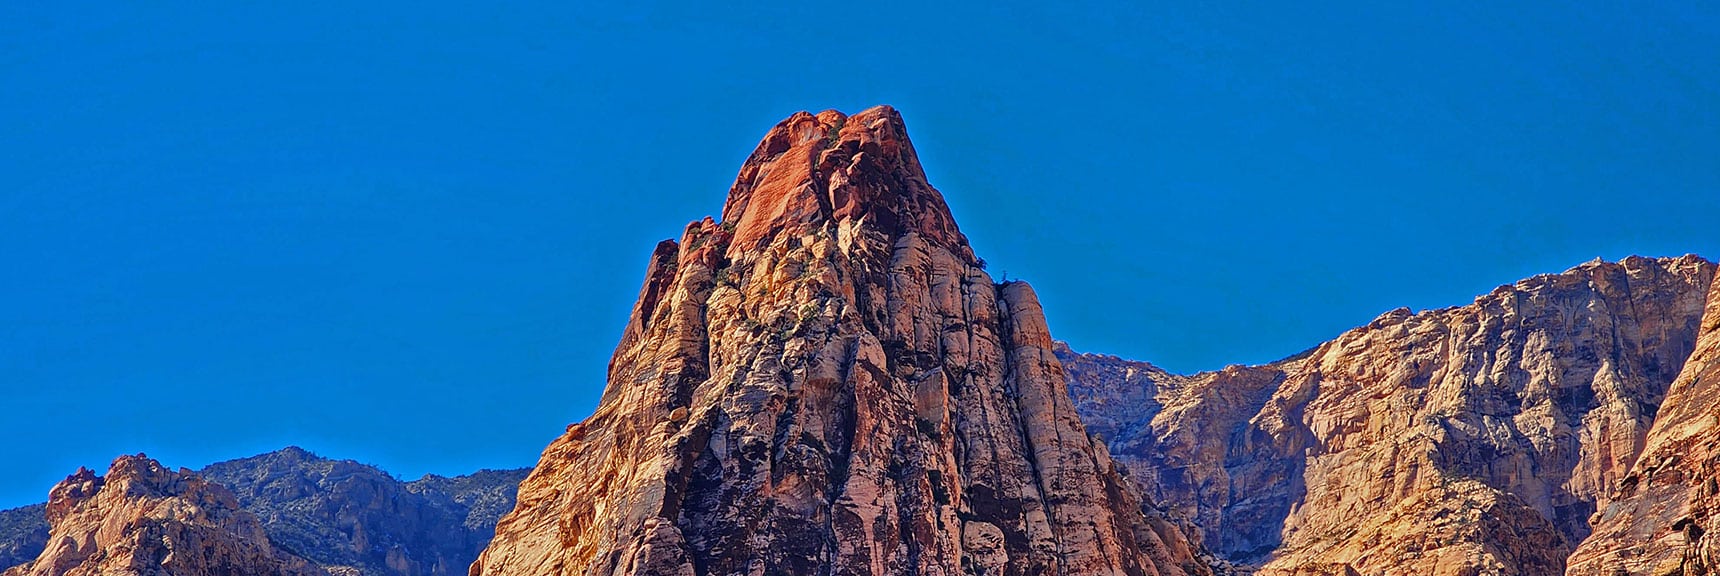 Final Close-up View of Mescalito Pyramid's Summit with Upper Crest Ridgeline as Backdrop. | Rock Climber Observations | Pine Creek Canyon | Rainbow Mountain Wilderness, Nevada